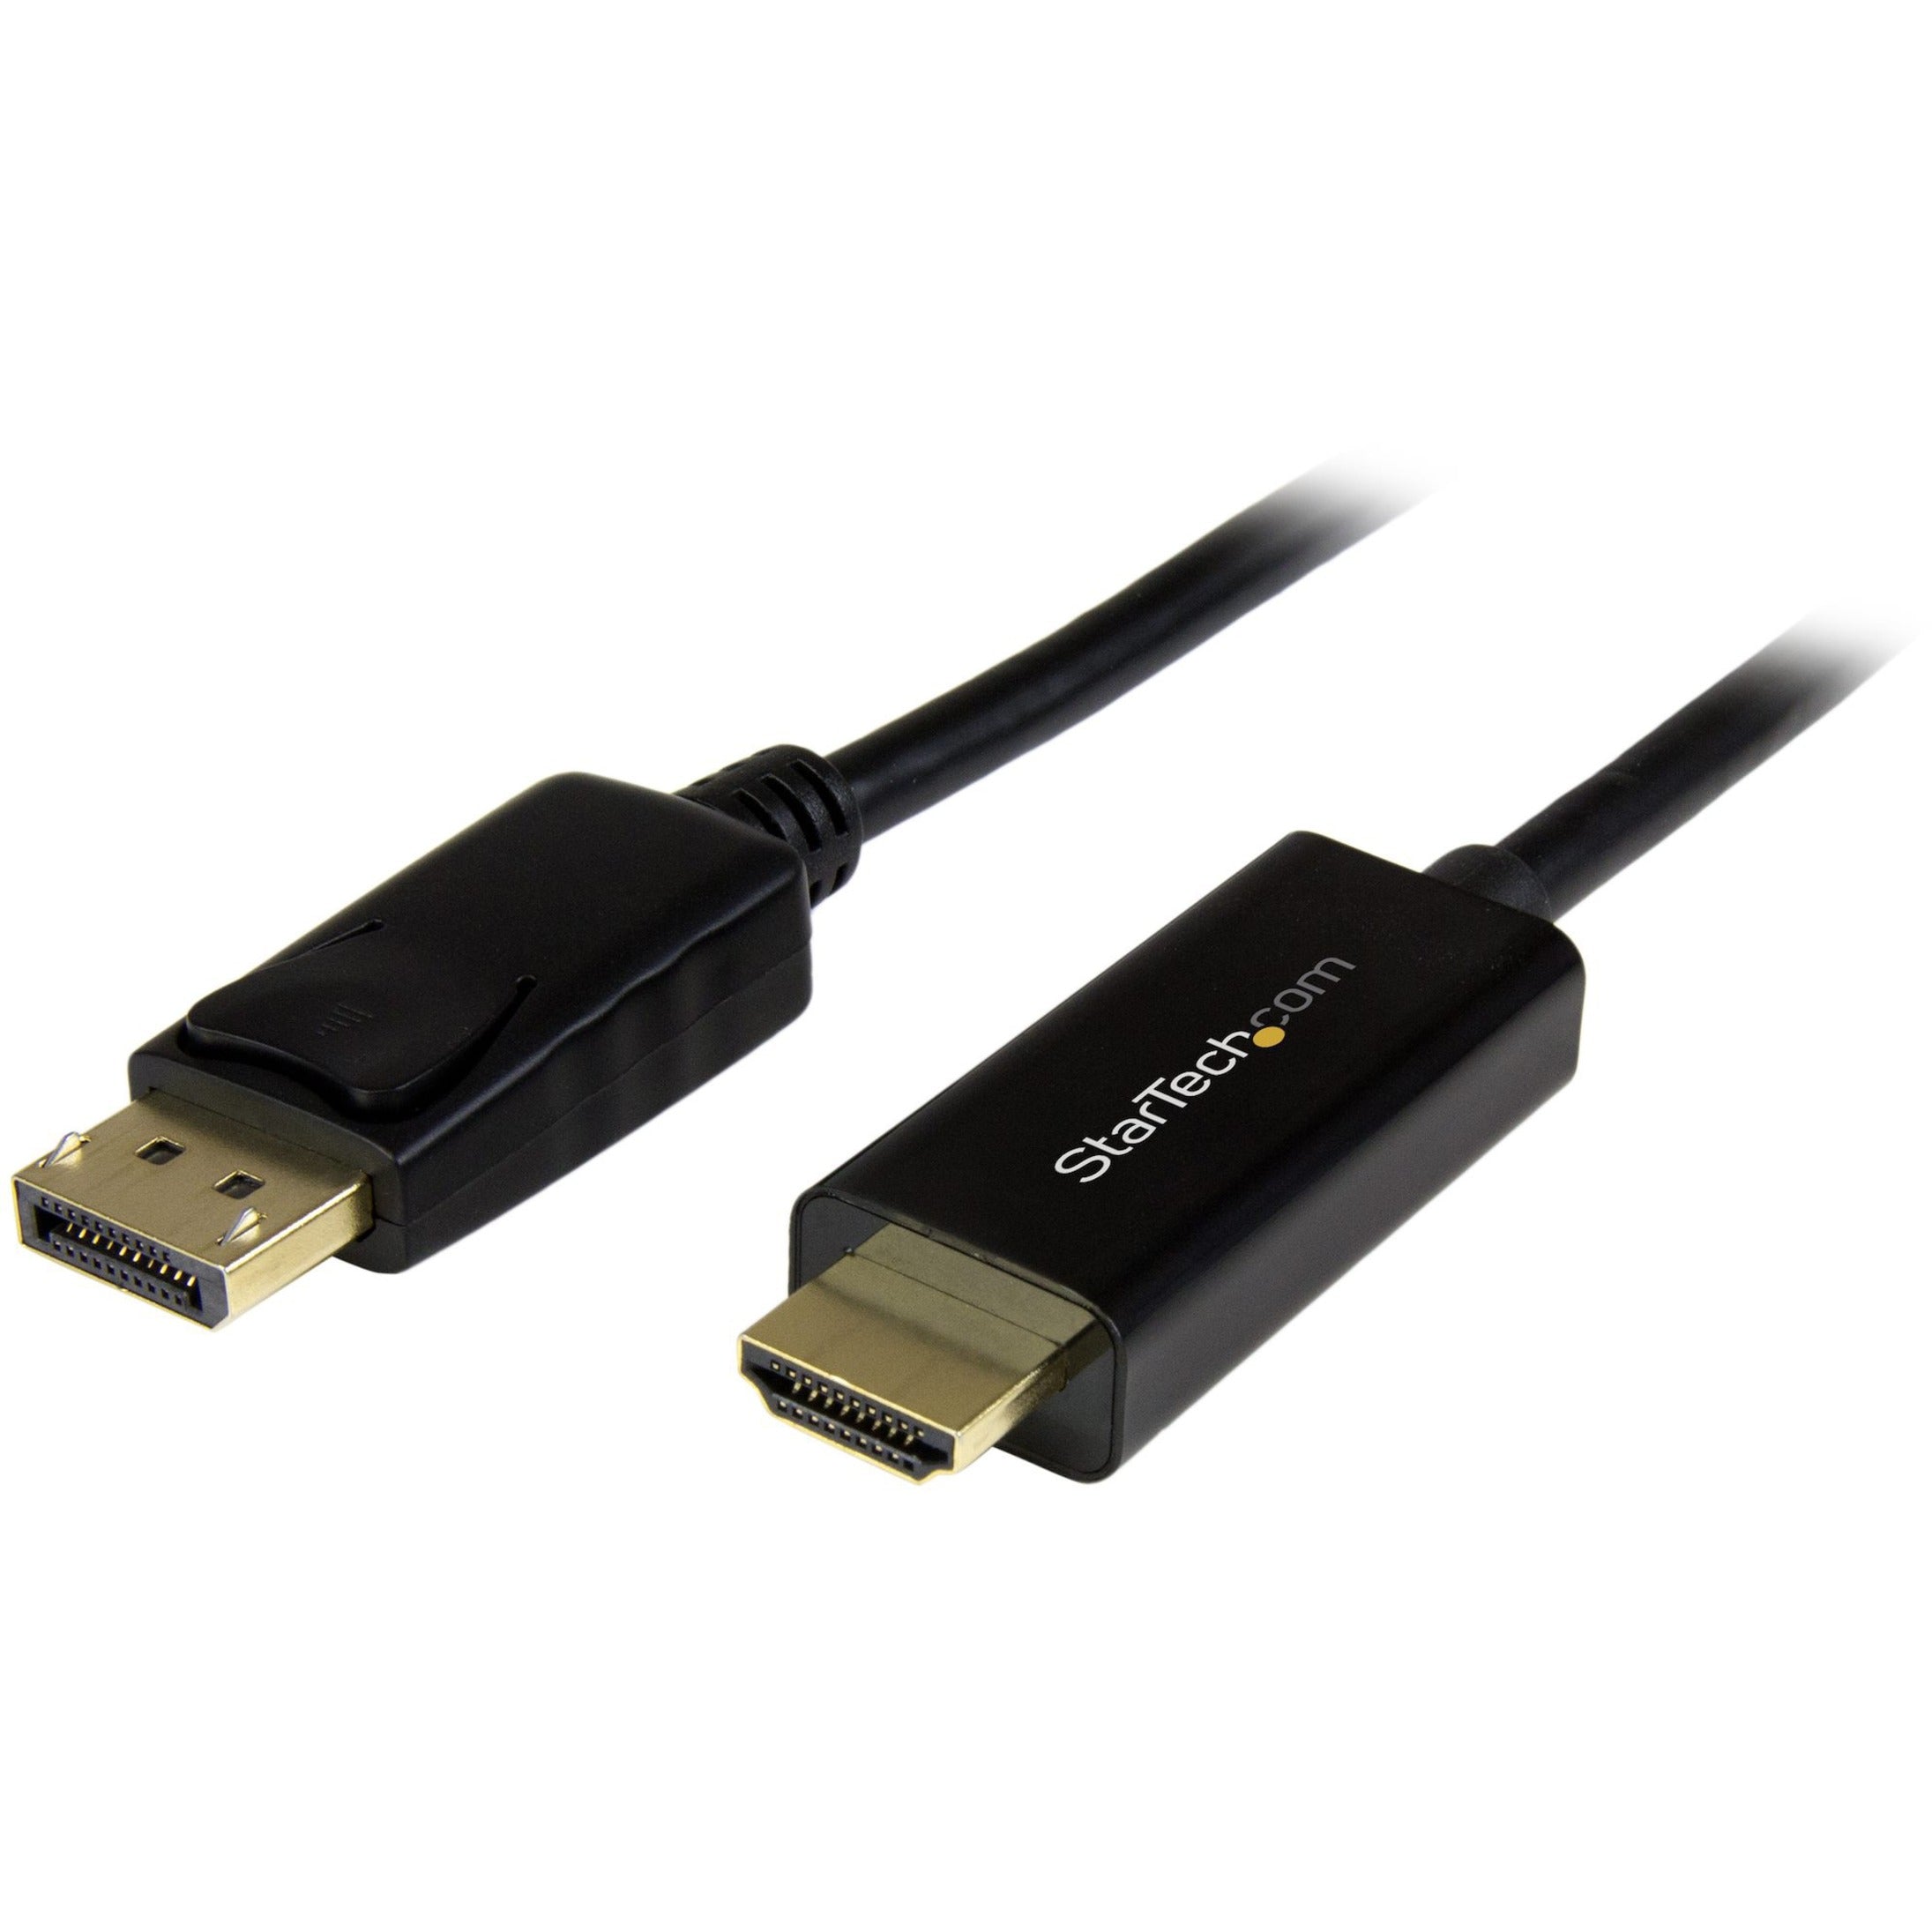 StarTech.com DP2HDMM3MB DisplayPort to HDMI Adapter Cable - 3 m (10 ft.) - Ultra HD 4K 30 Hz, Built-in Cable